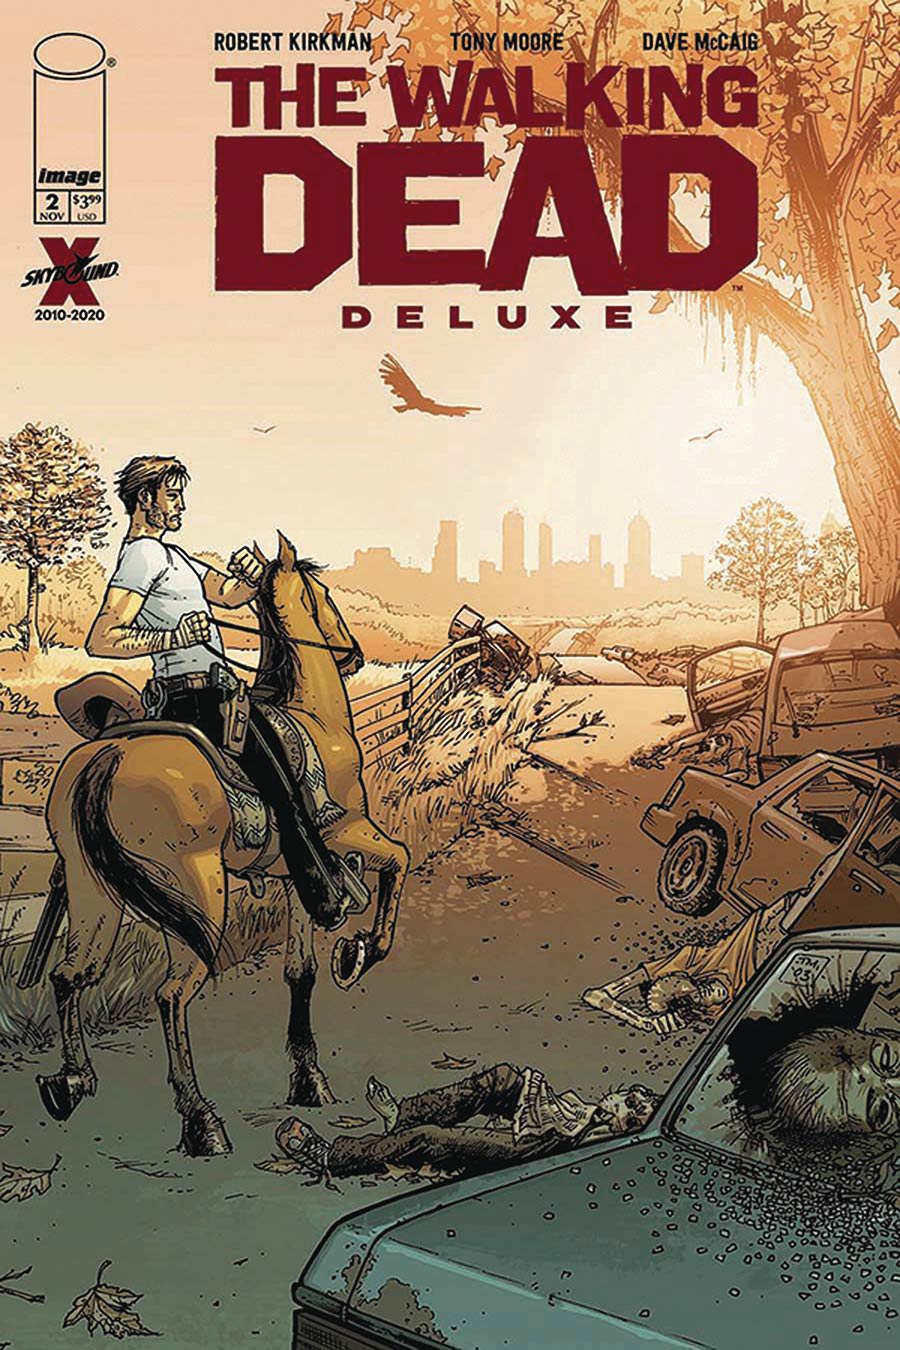 Walking Dead Deluxe #2 Cover F DF Tony Moore Cover CGC Graded